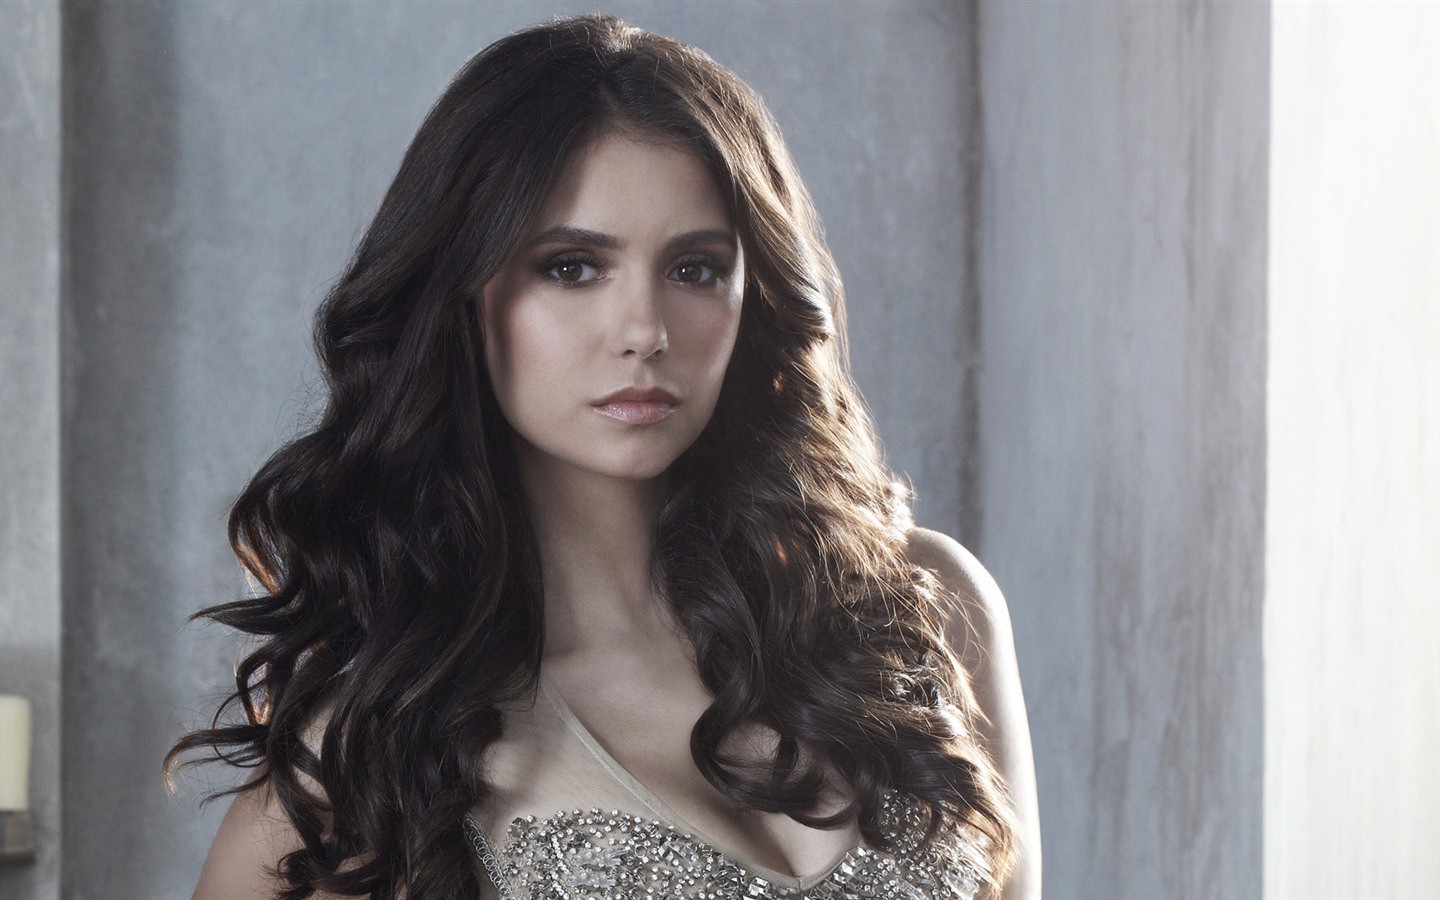 The Vampire Diaries wallpapers HD #15 - 1440x900